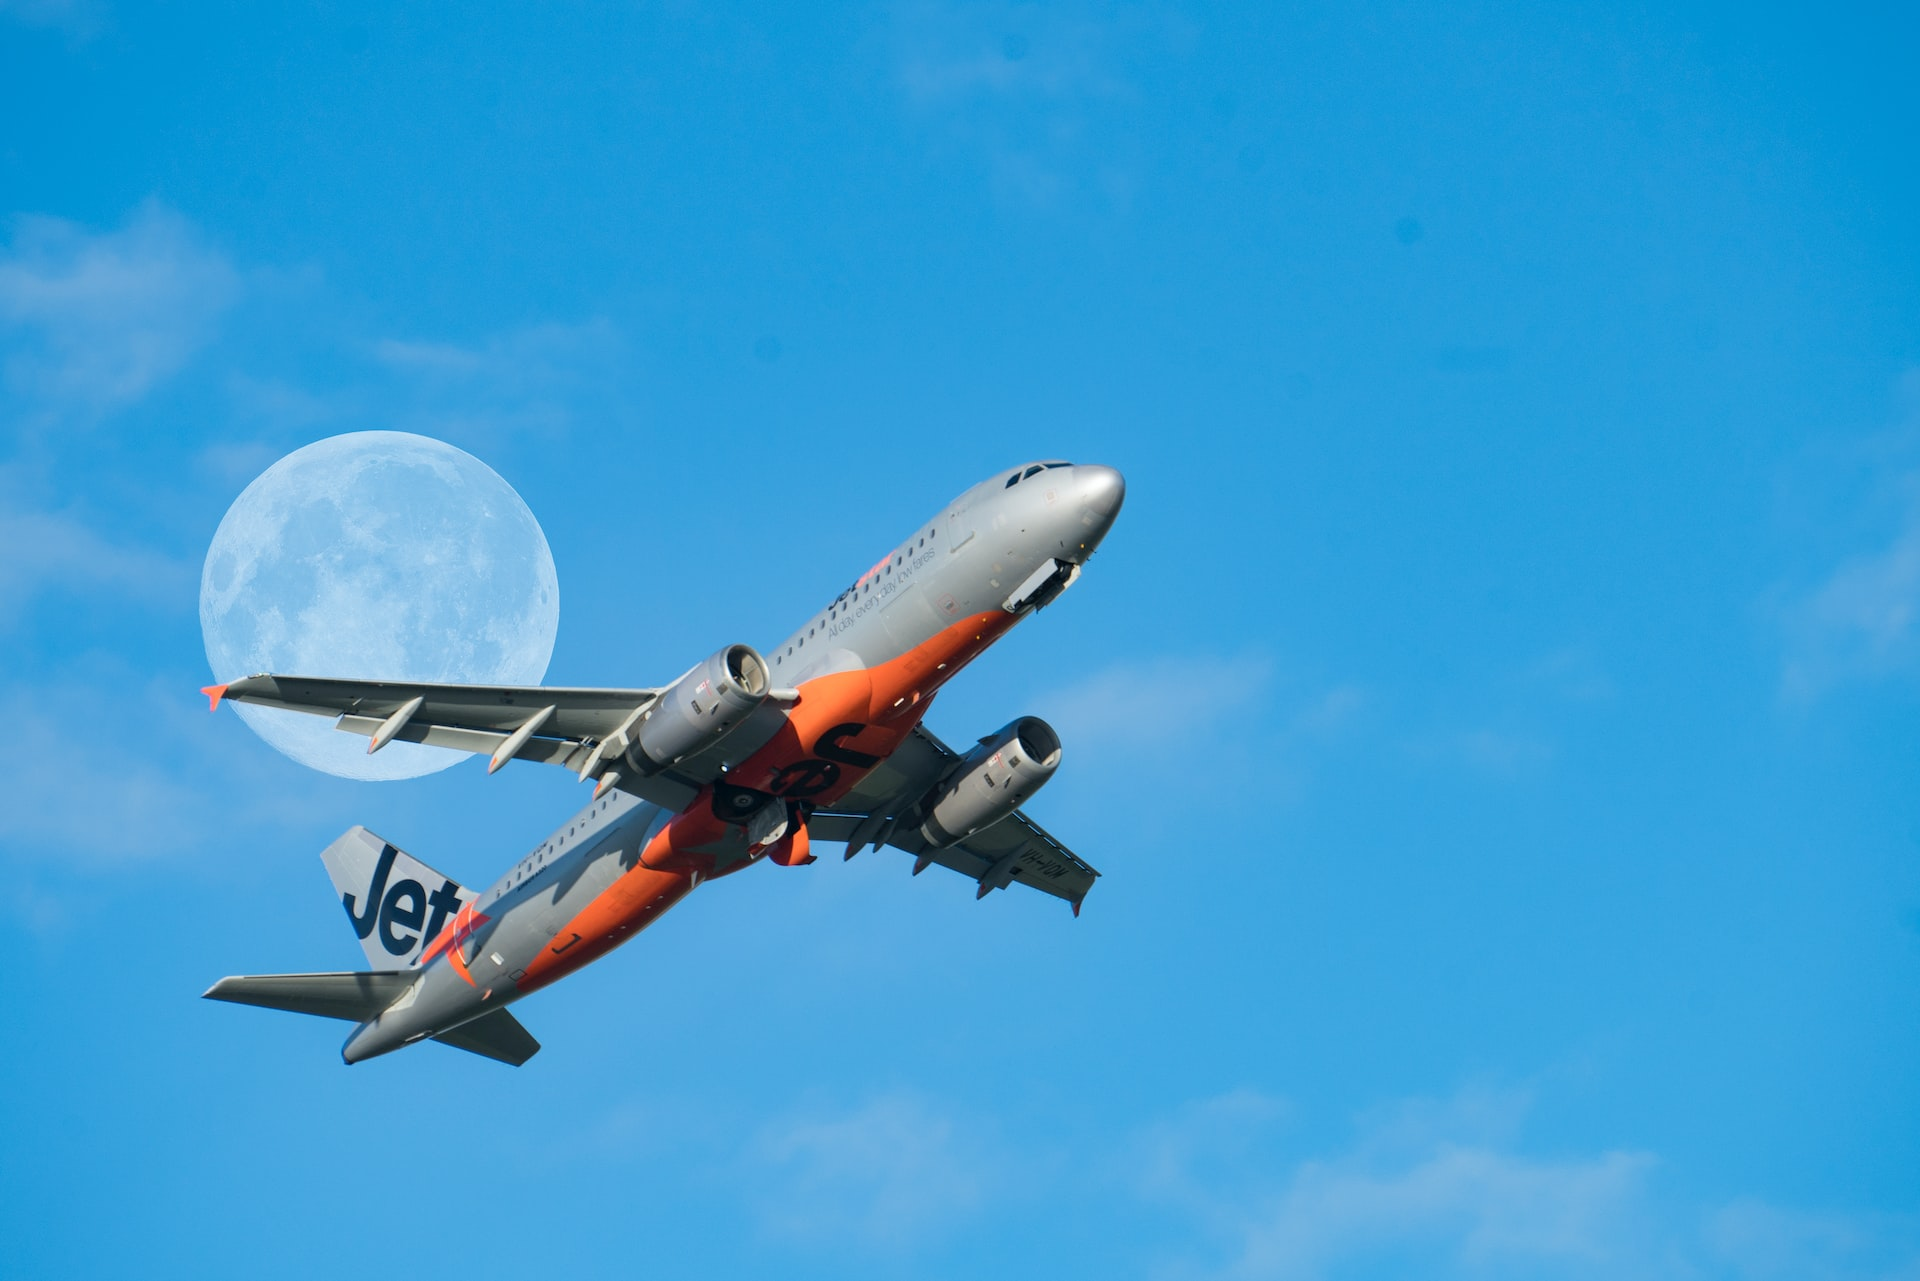 An aircraft taking off with a moon in the background.